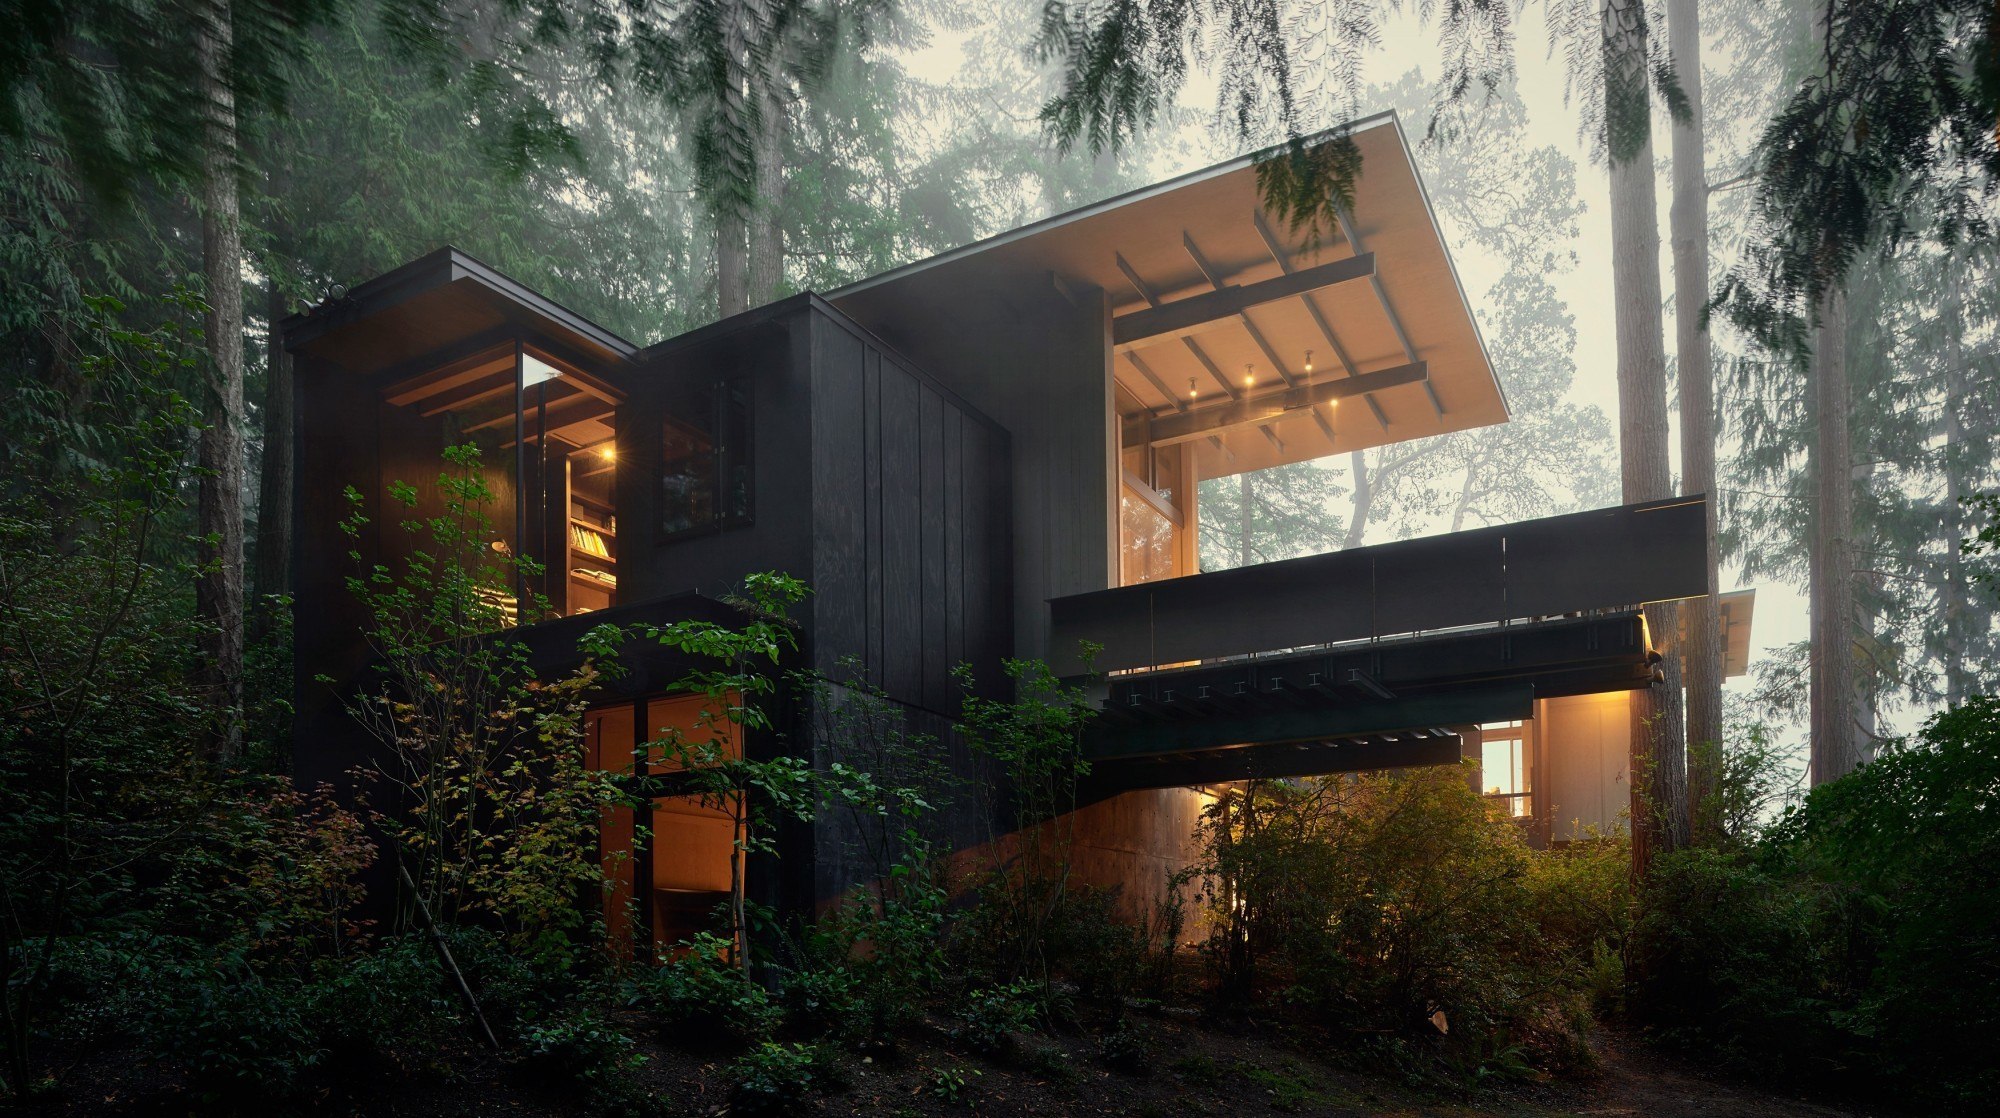 Home of a Starchitect: Cabin at Longbranch by Olson Kundig